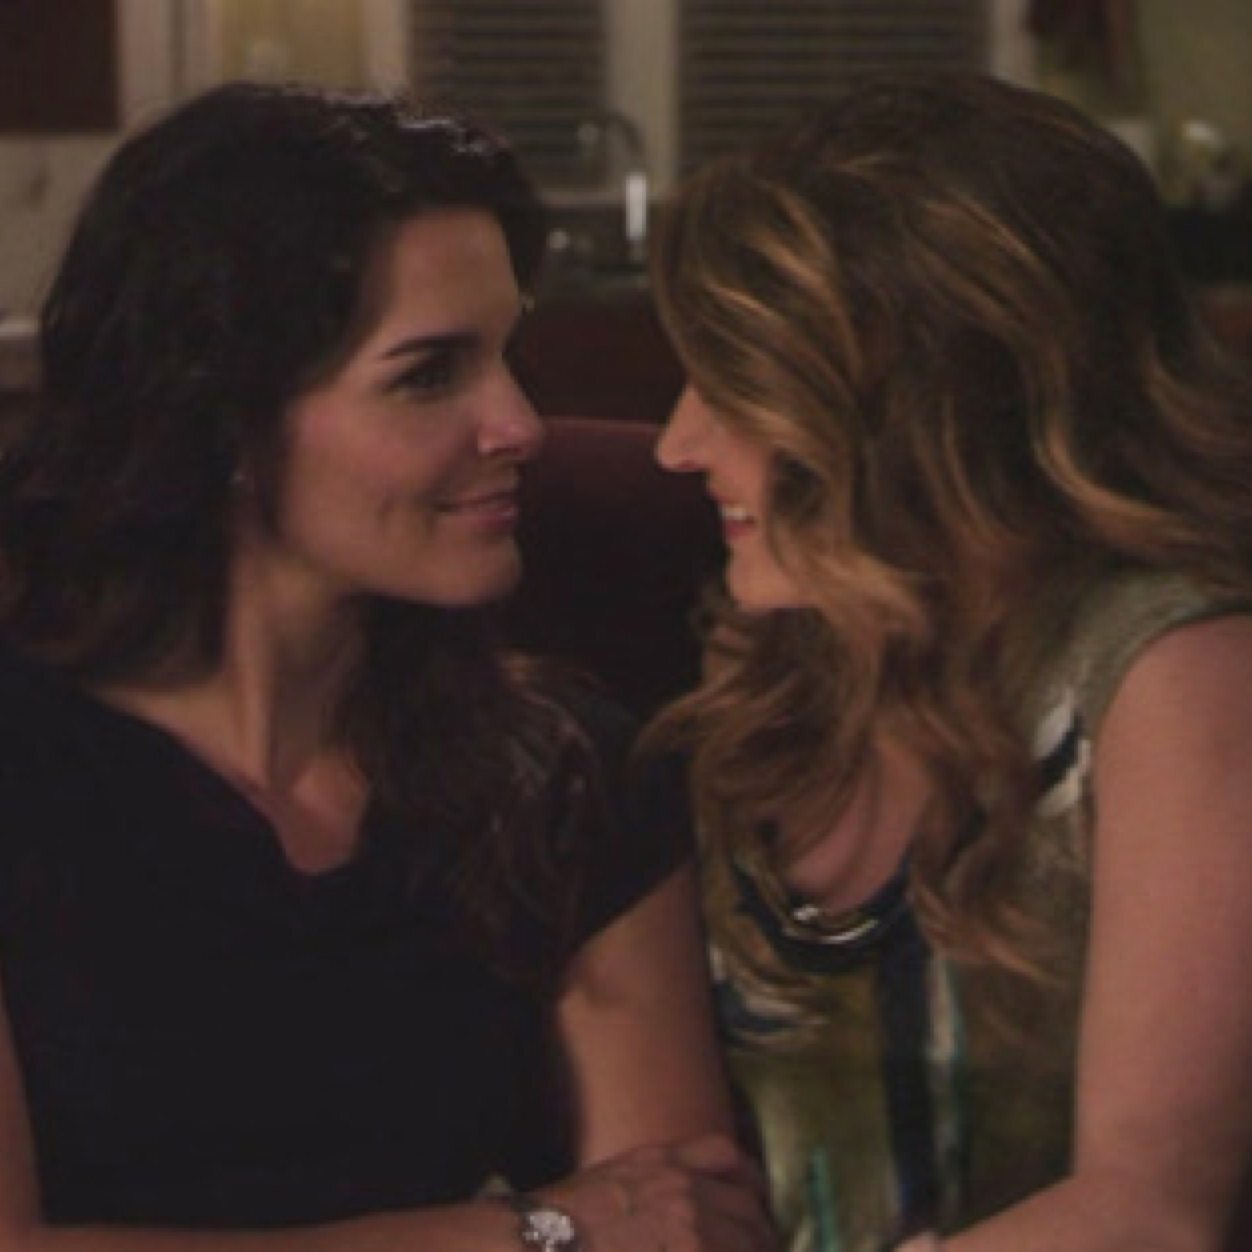 We all see it...we all want it...Rizzles IS HAPPENING